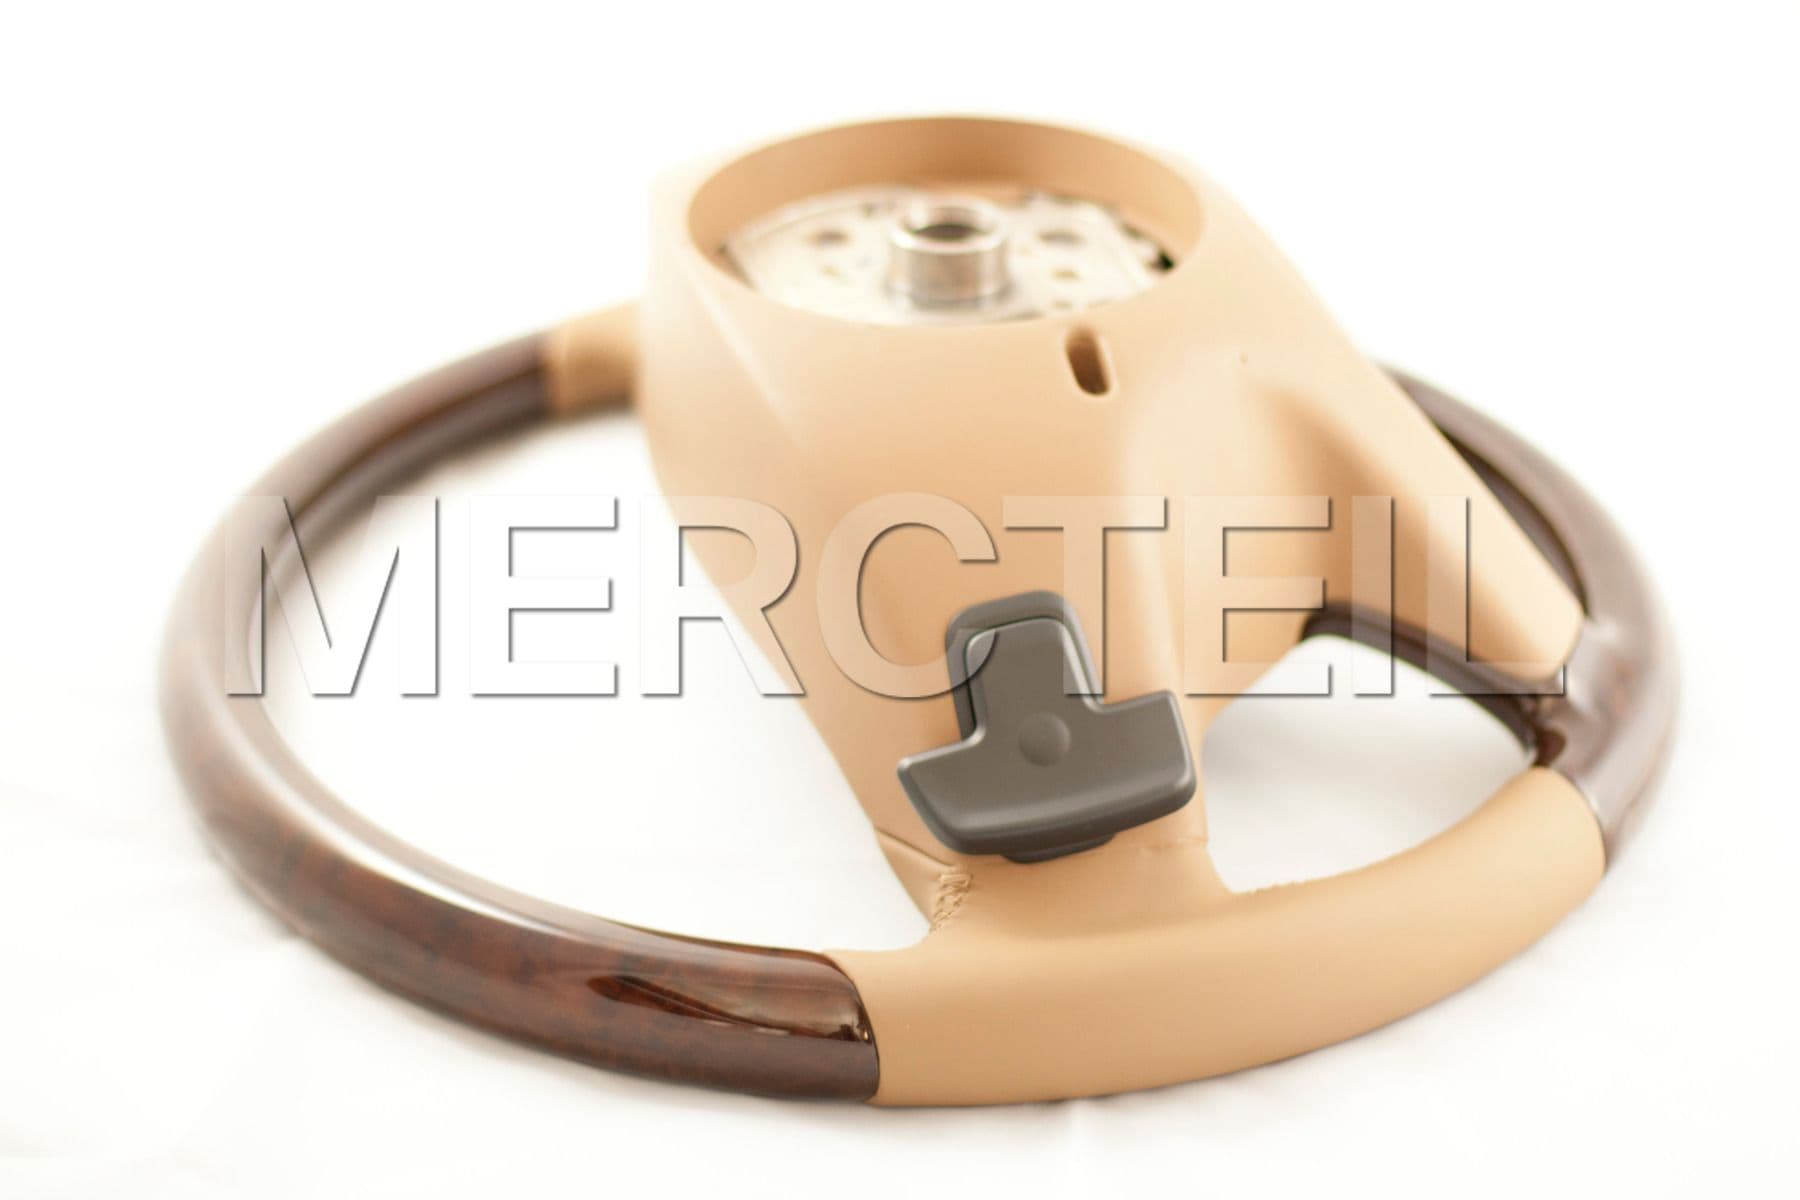 Leather Beige Steering Wheel With Burred Walnut Trims; A22146030038L41, A2214603003.